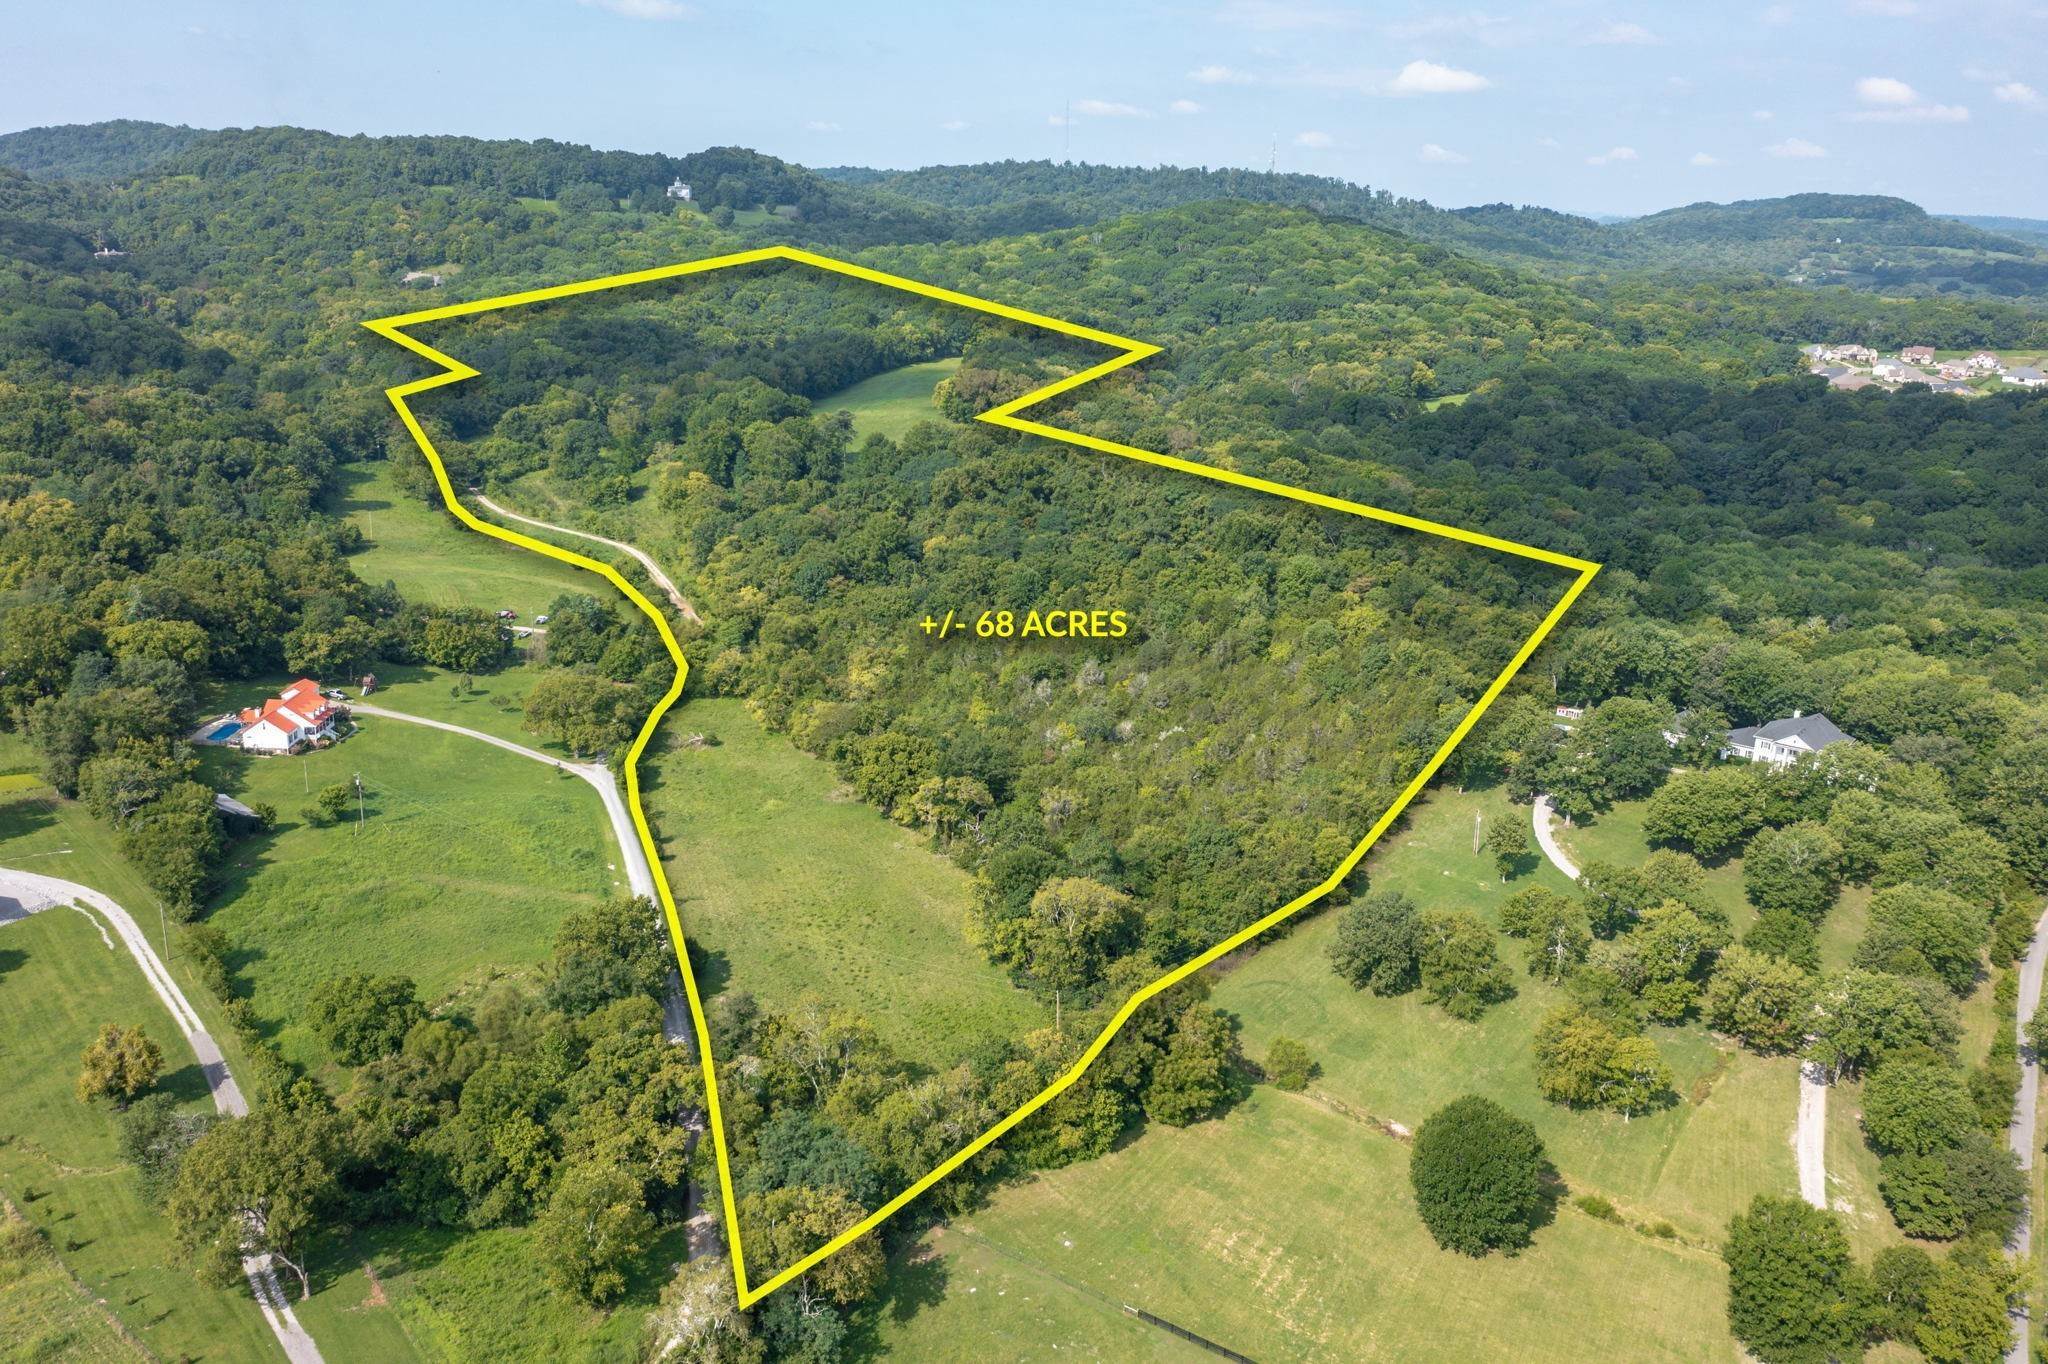 Property for Sale at 1942 Burke Hollow Road Nolensville, Tennessee 37135 United States